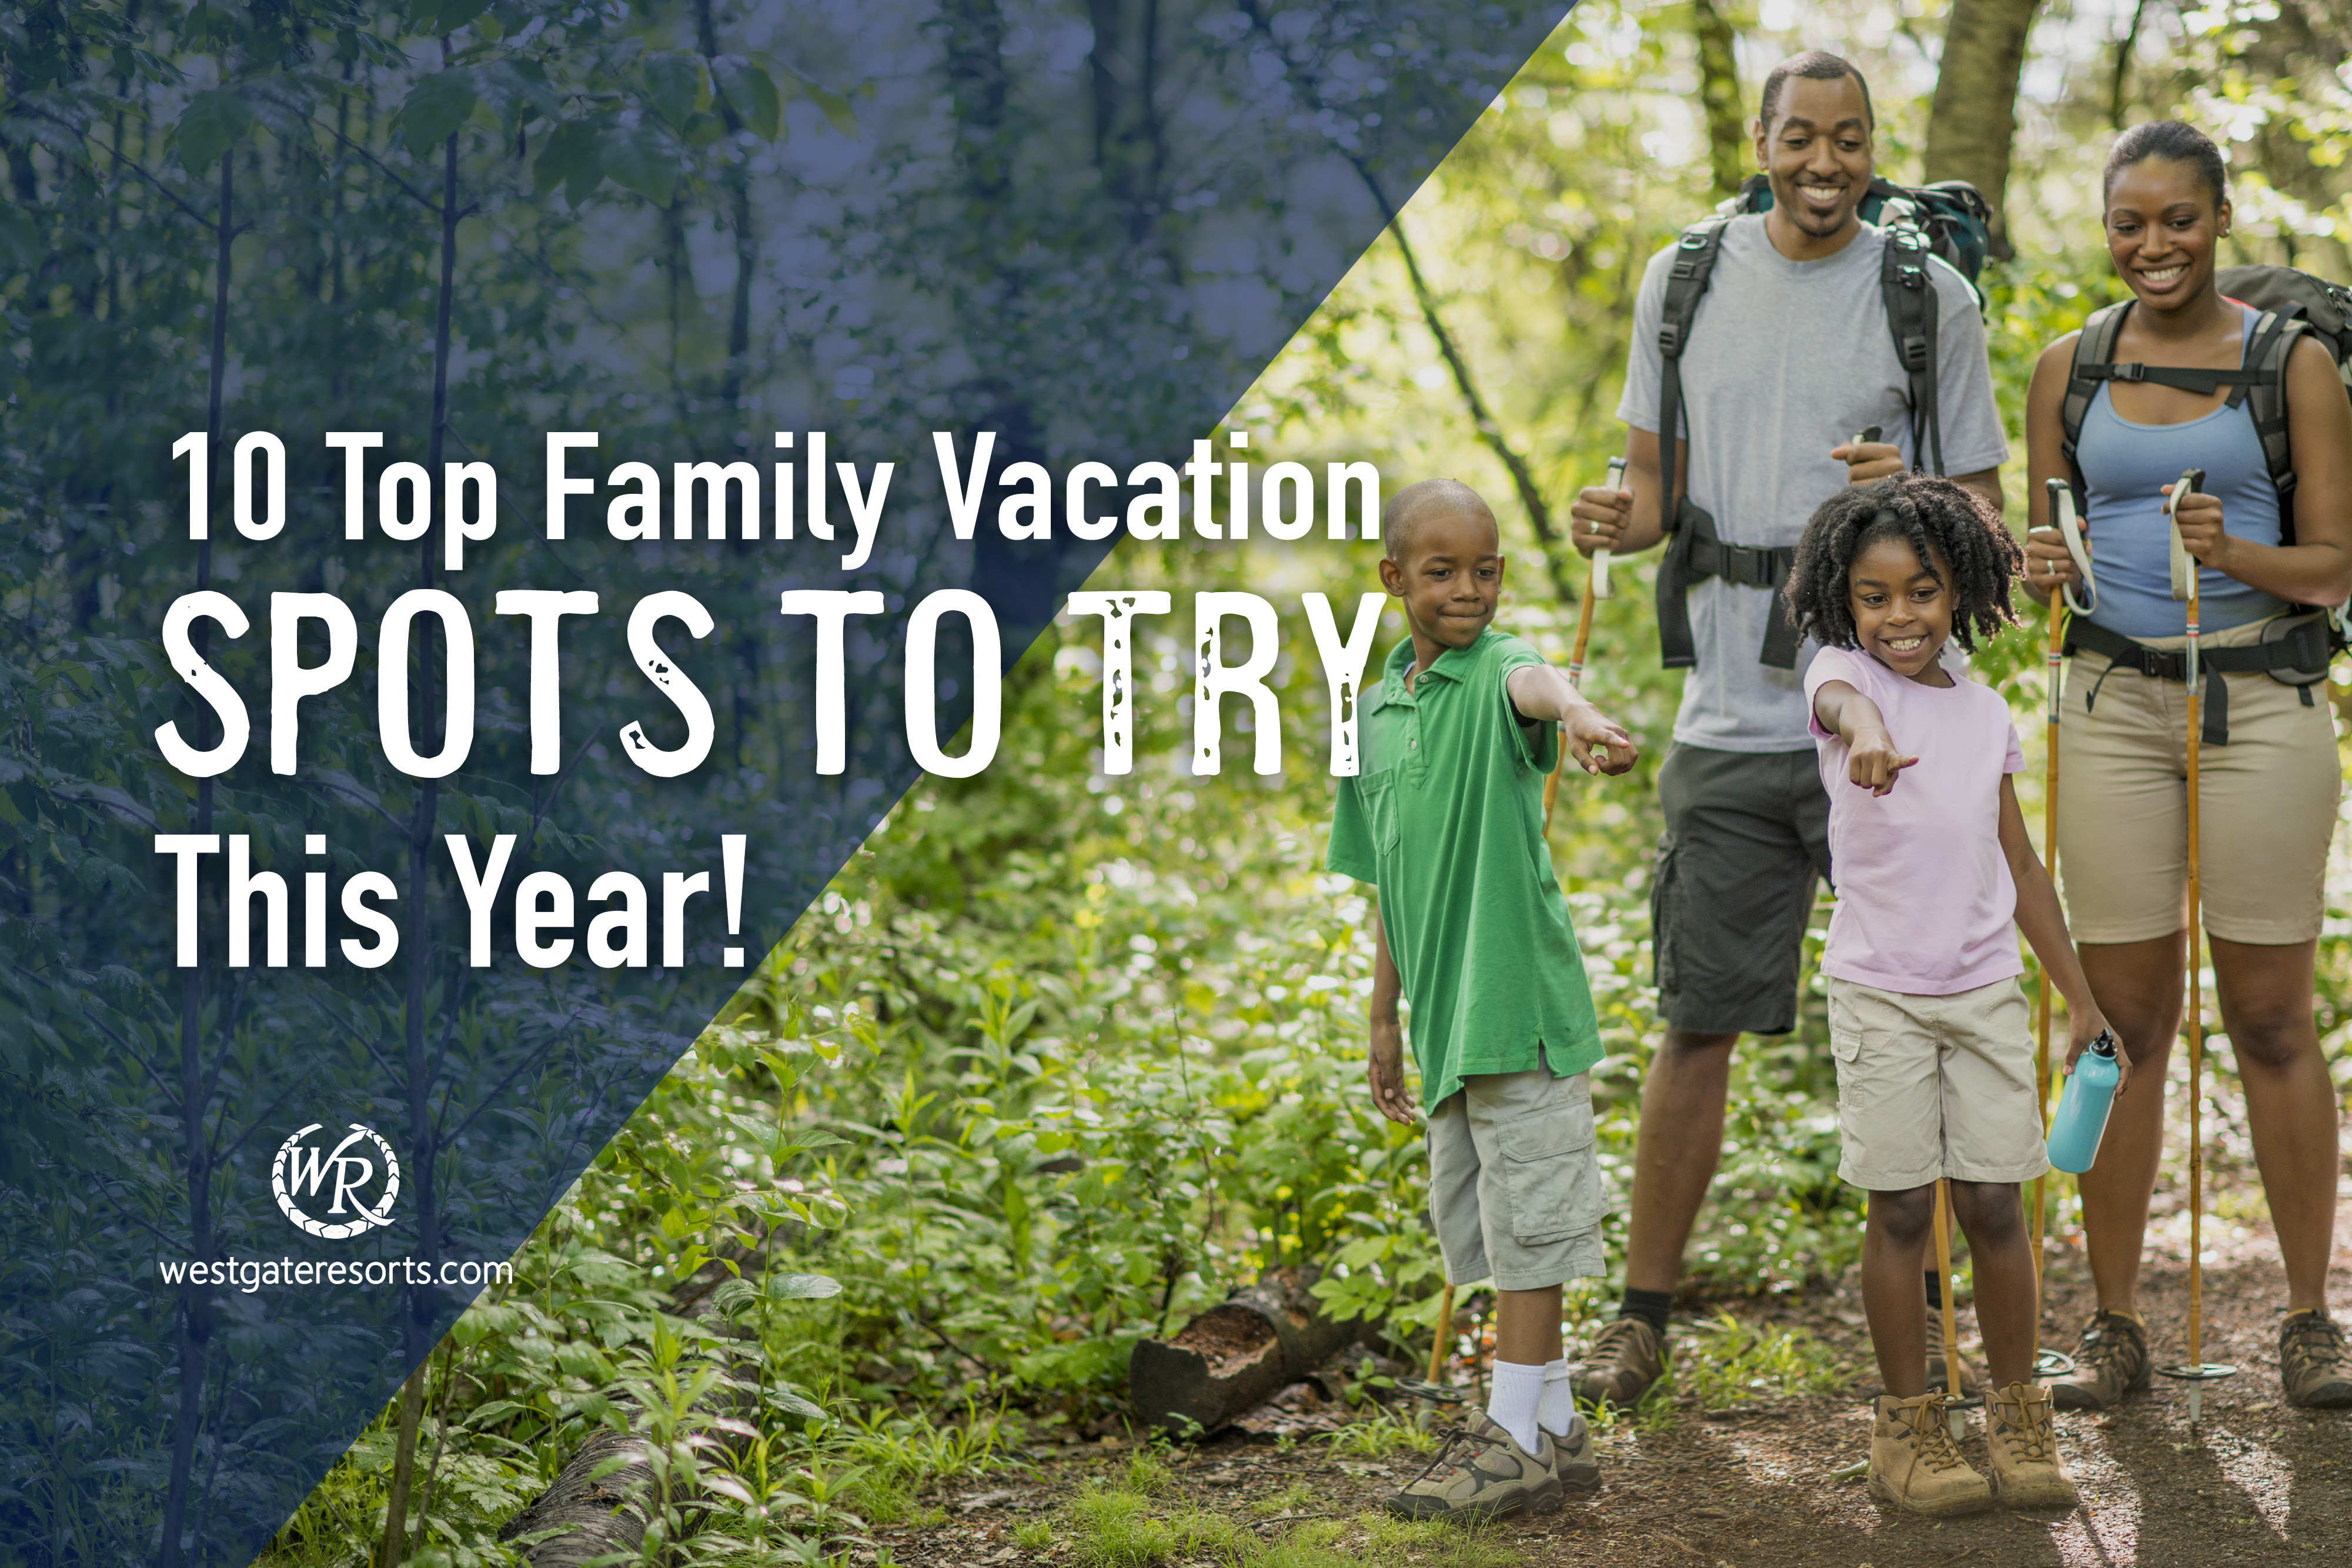 11 Top Family Vacation Spots to Try This Year!